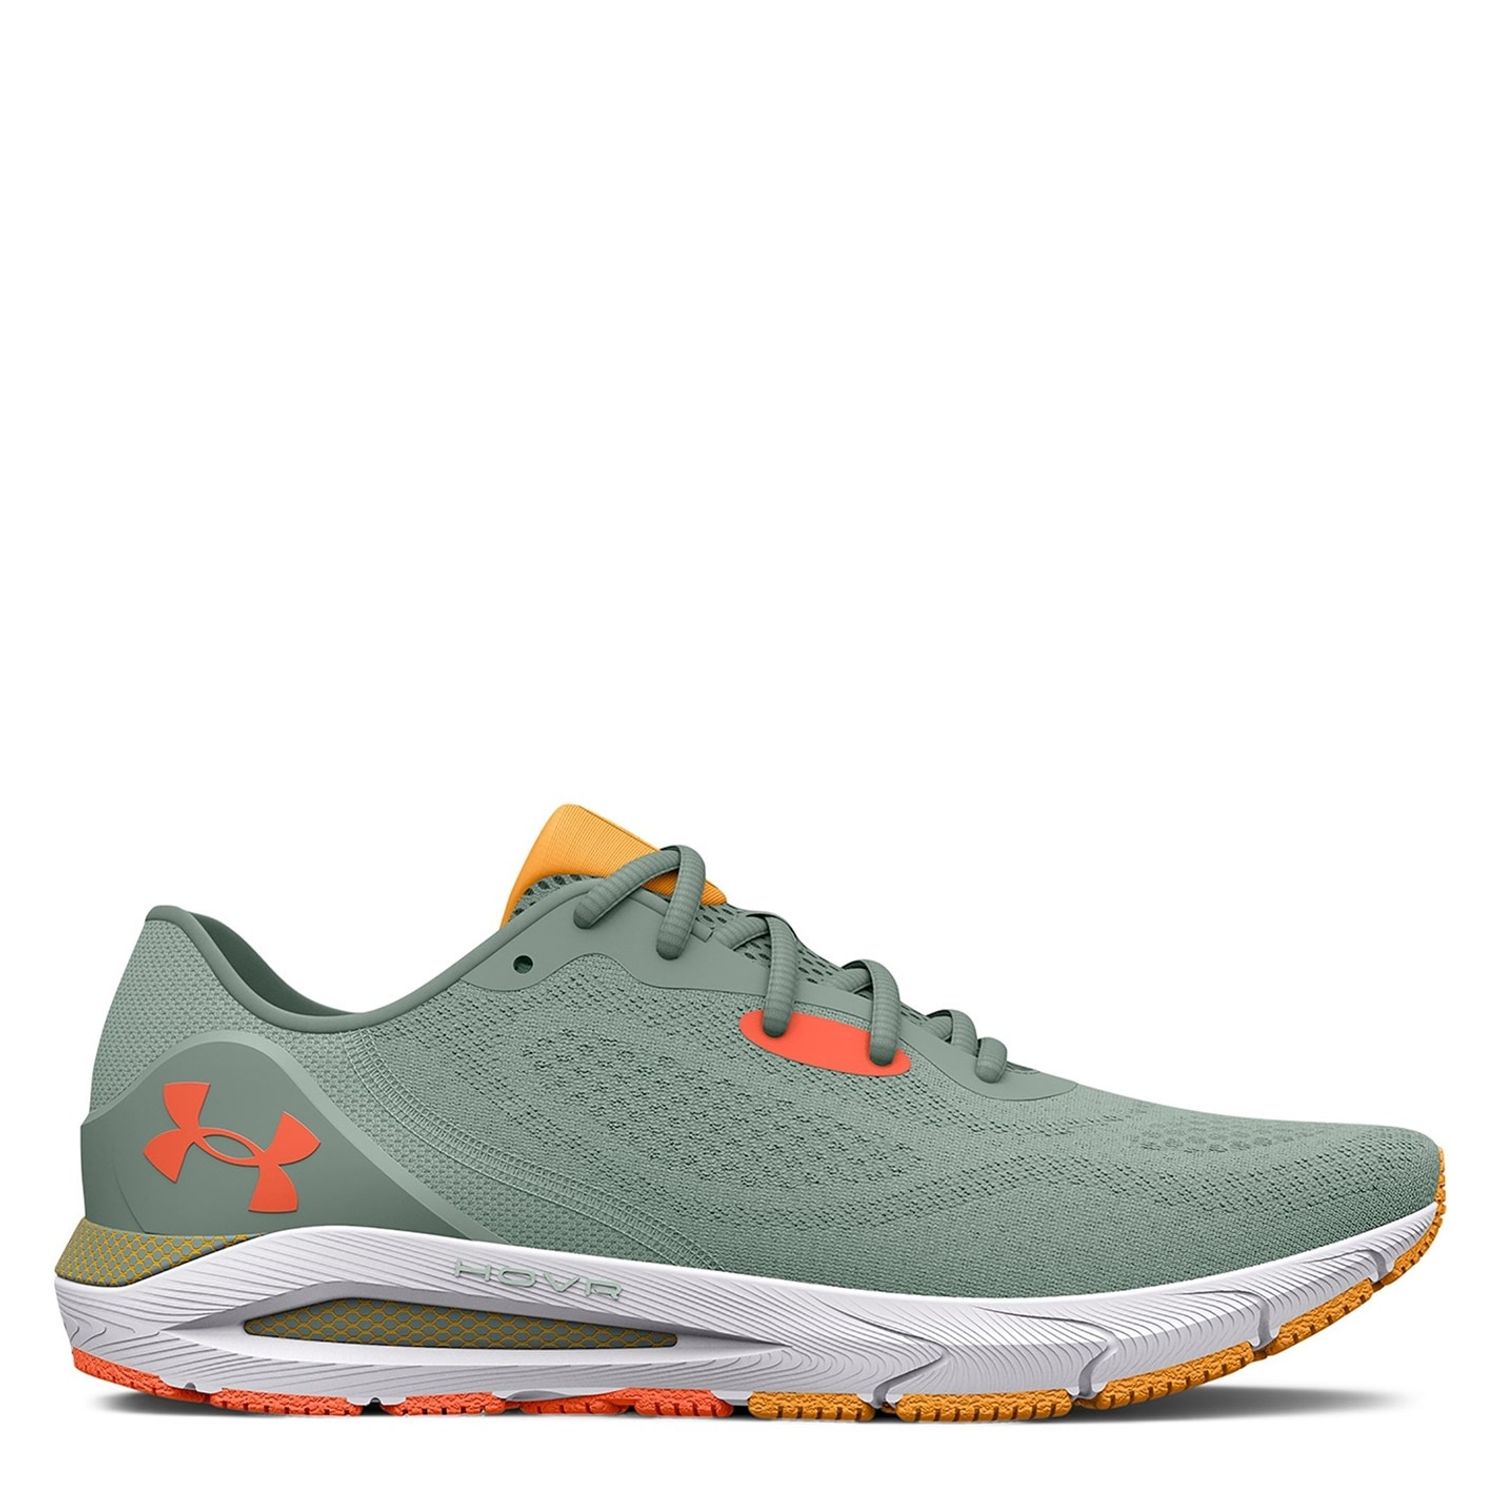 Grey Under Armour HOVR Sonic 5 Running Shoes Ladies - Get The Label